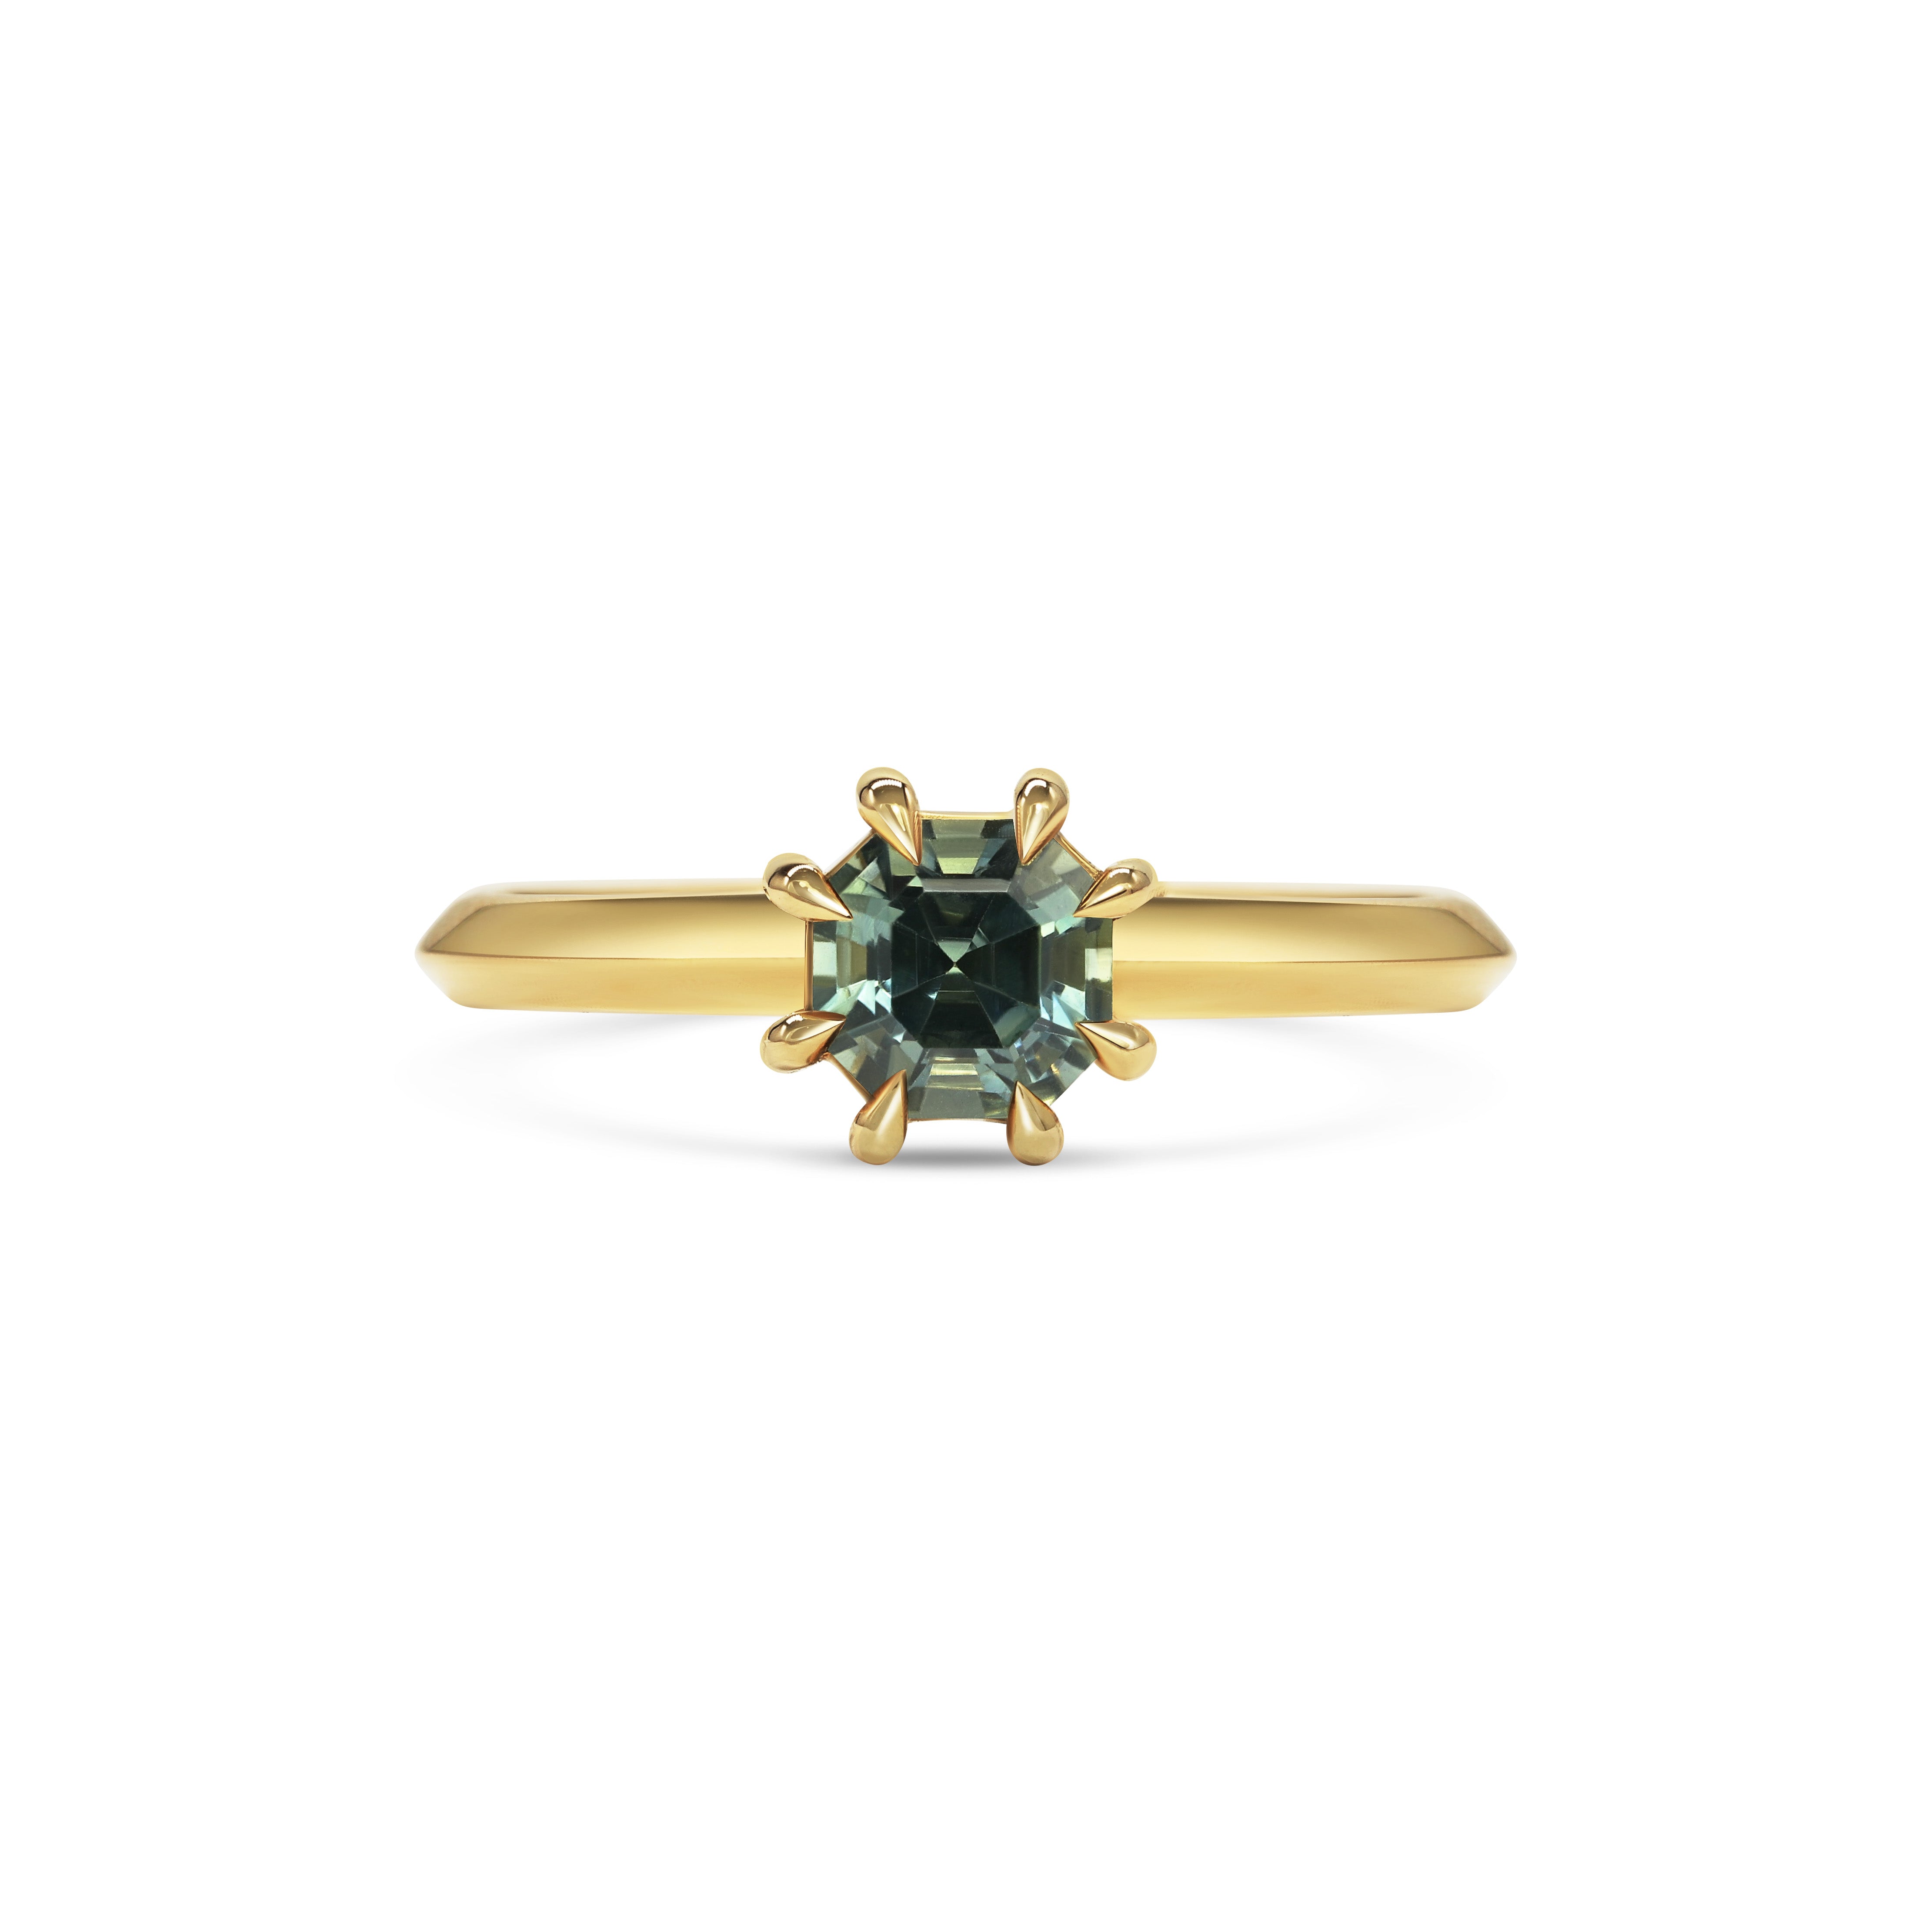 The Igara Ring by East London jeweller Rachel Boston | Discover our collections of unique and timeless engagement rings, wedding rings, and modern fine jewellery.